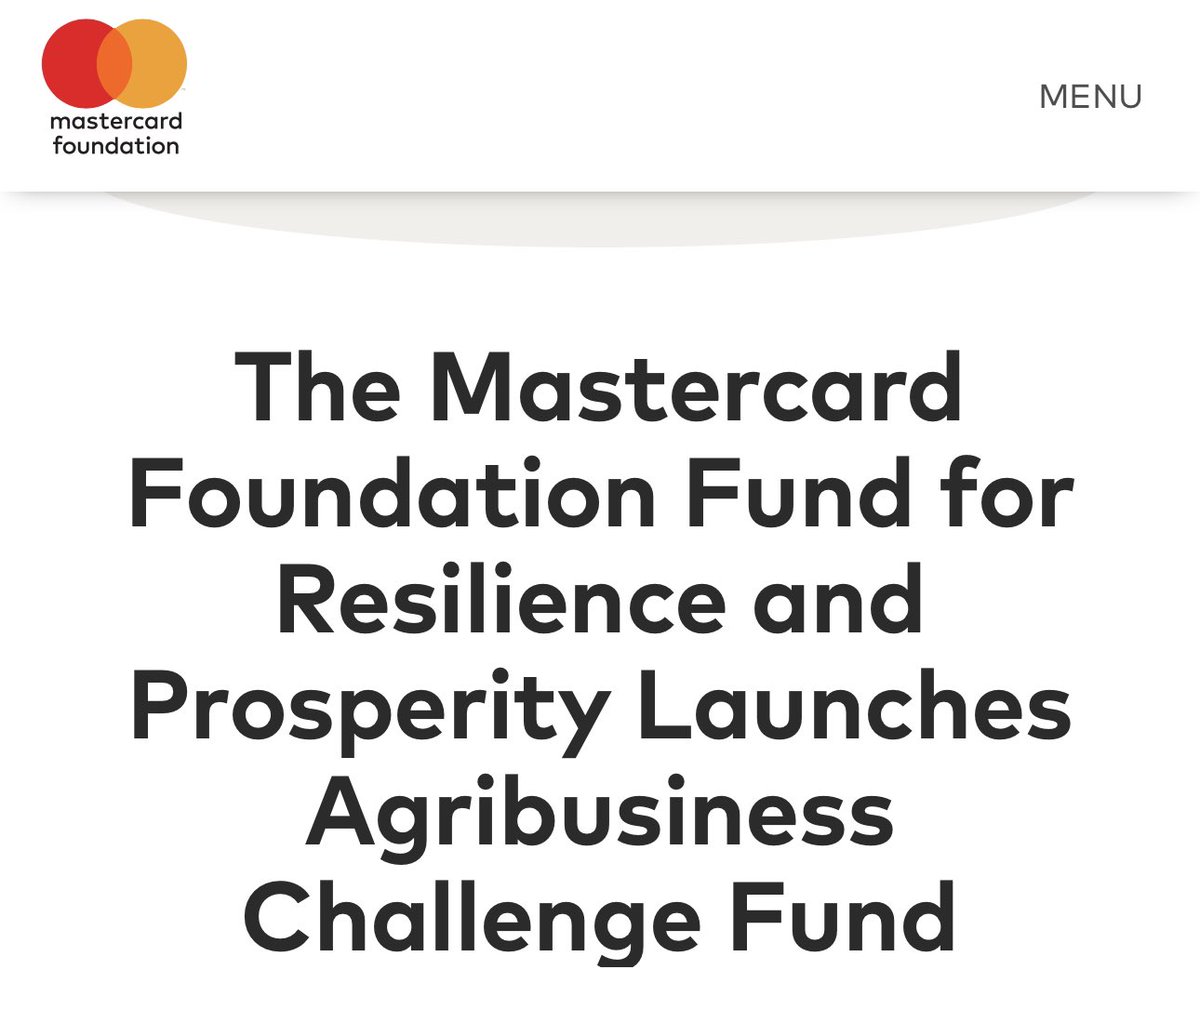 Founders from; Uganda Kenya Burundi Nigeria Rwanda Tanzania , @MastercardFdn has some great opportunity 4 you. Selected SMEs will receive grants ranging from US$ 500K to US$ 2.5 M disbursed over a 3-year period. Go get this money frp.org